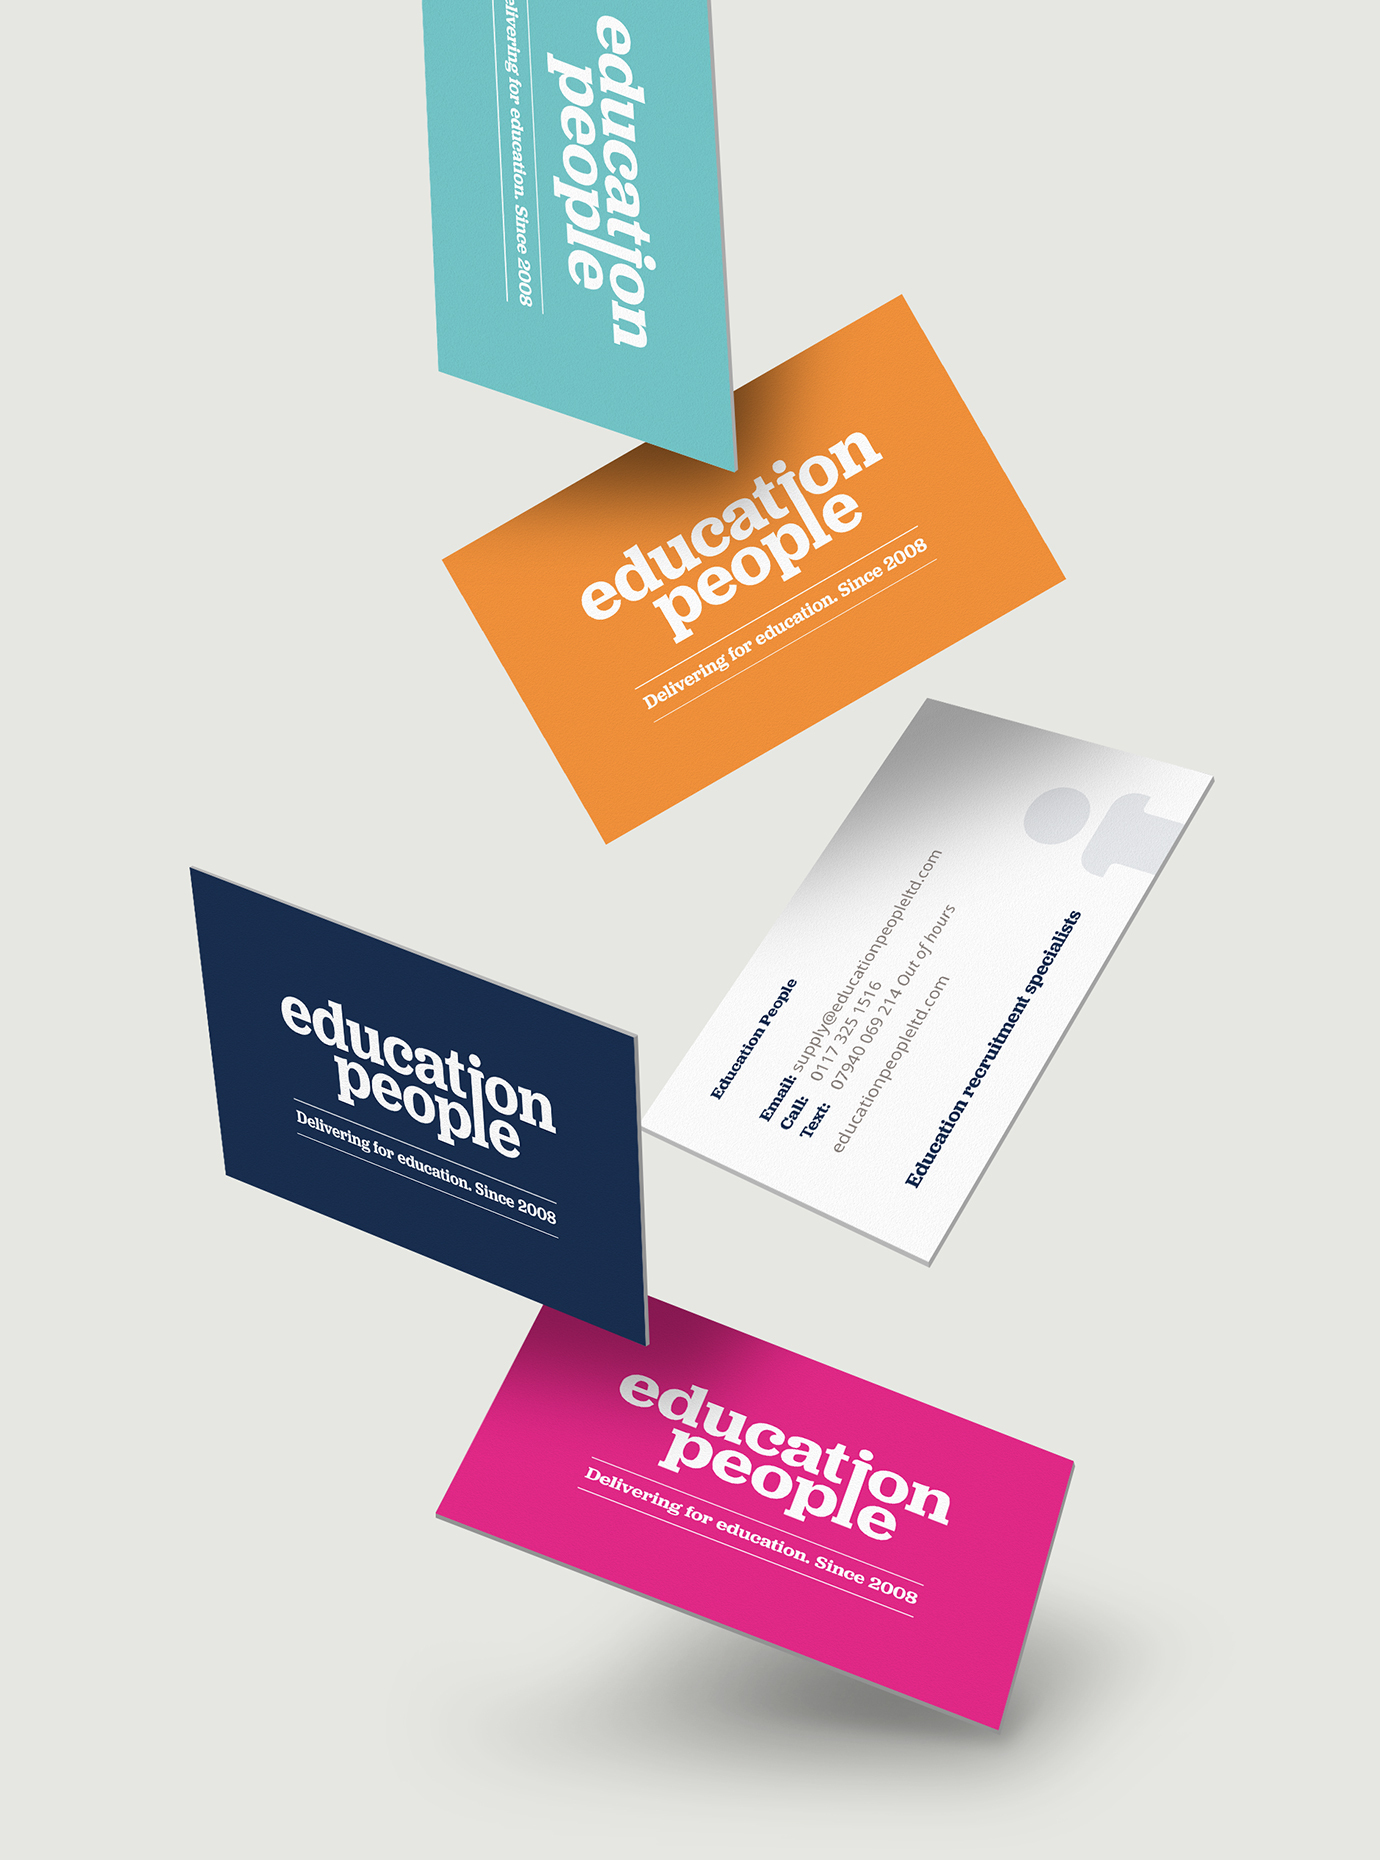 Education People business cards